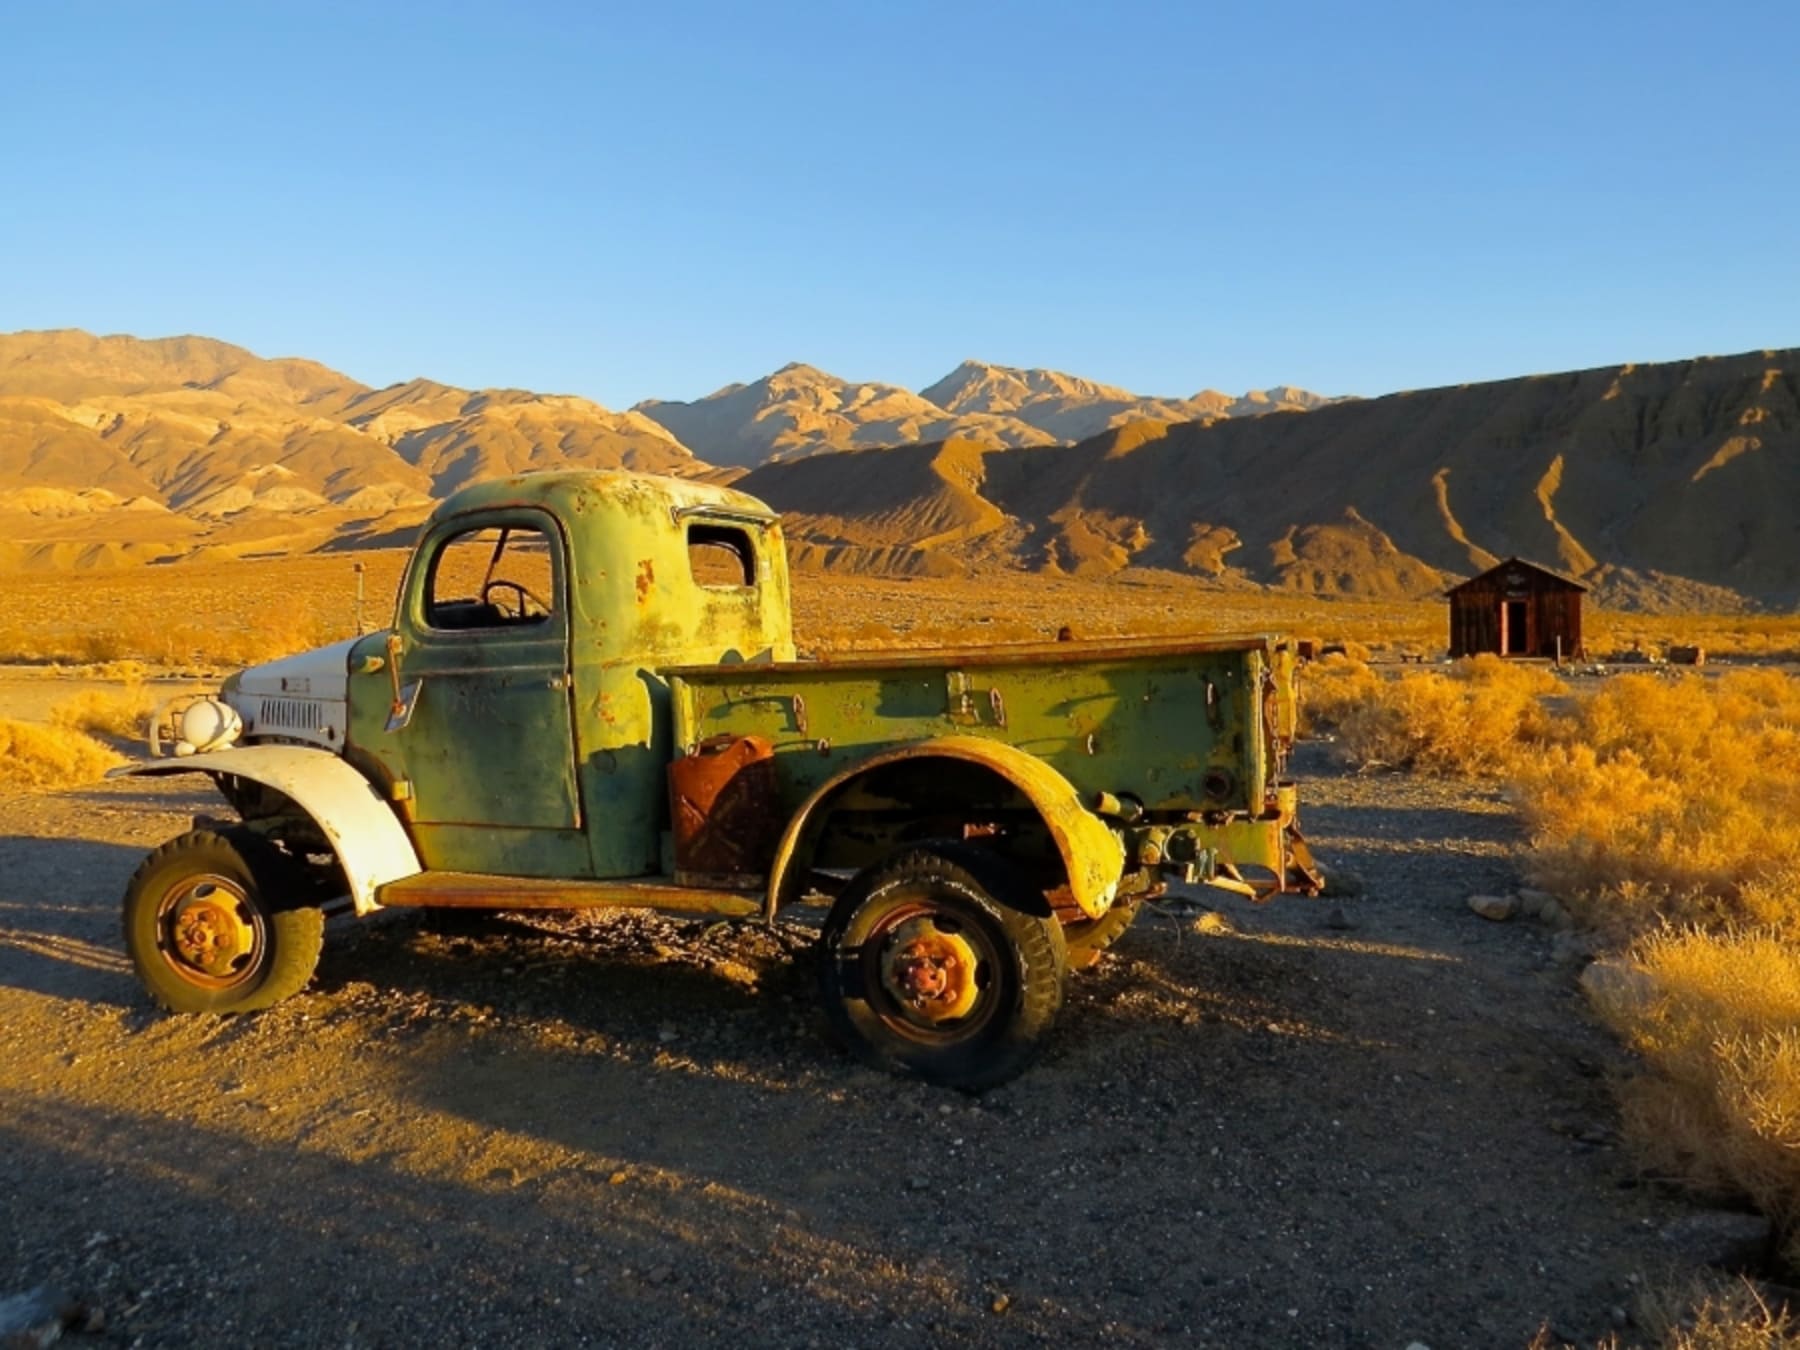 Path to Panamint City: Quest for a Death Valley Ghost Town